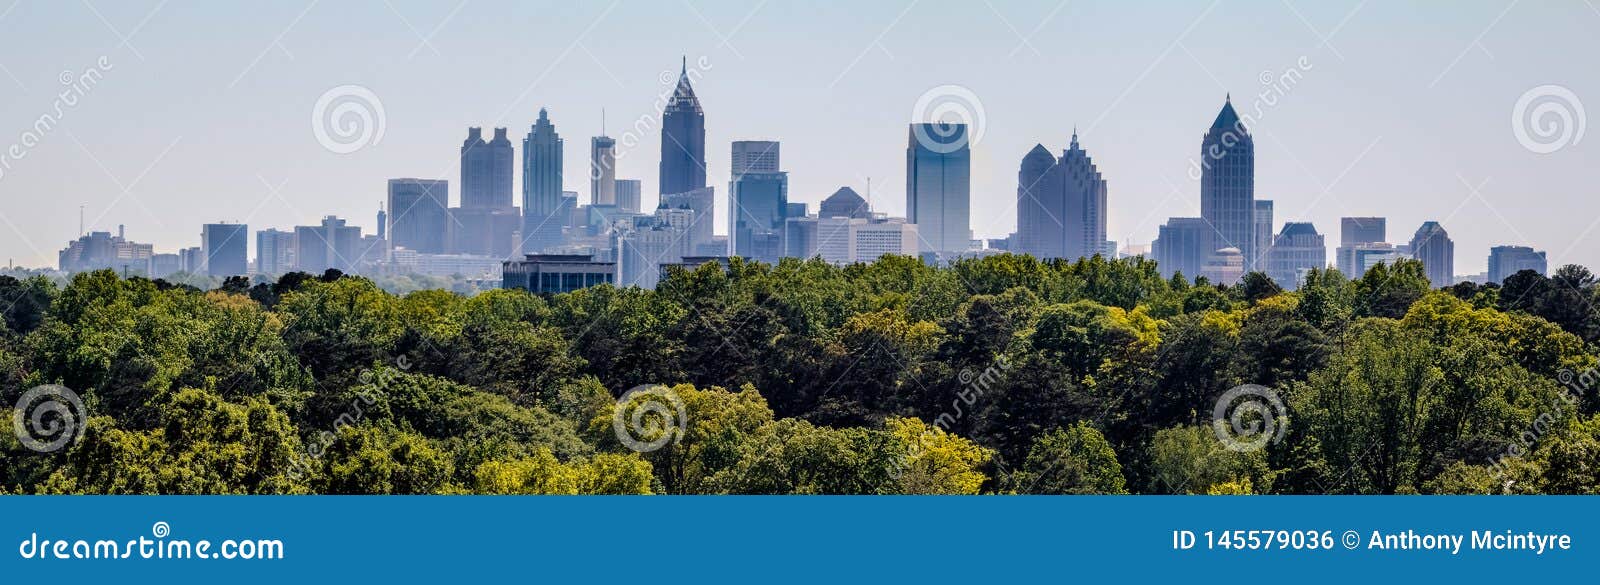 a view of the downtown atlanta skyline from buckhead